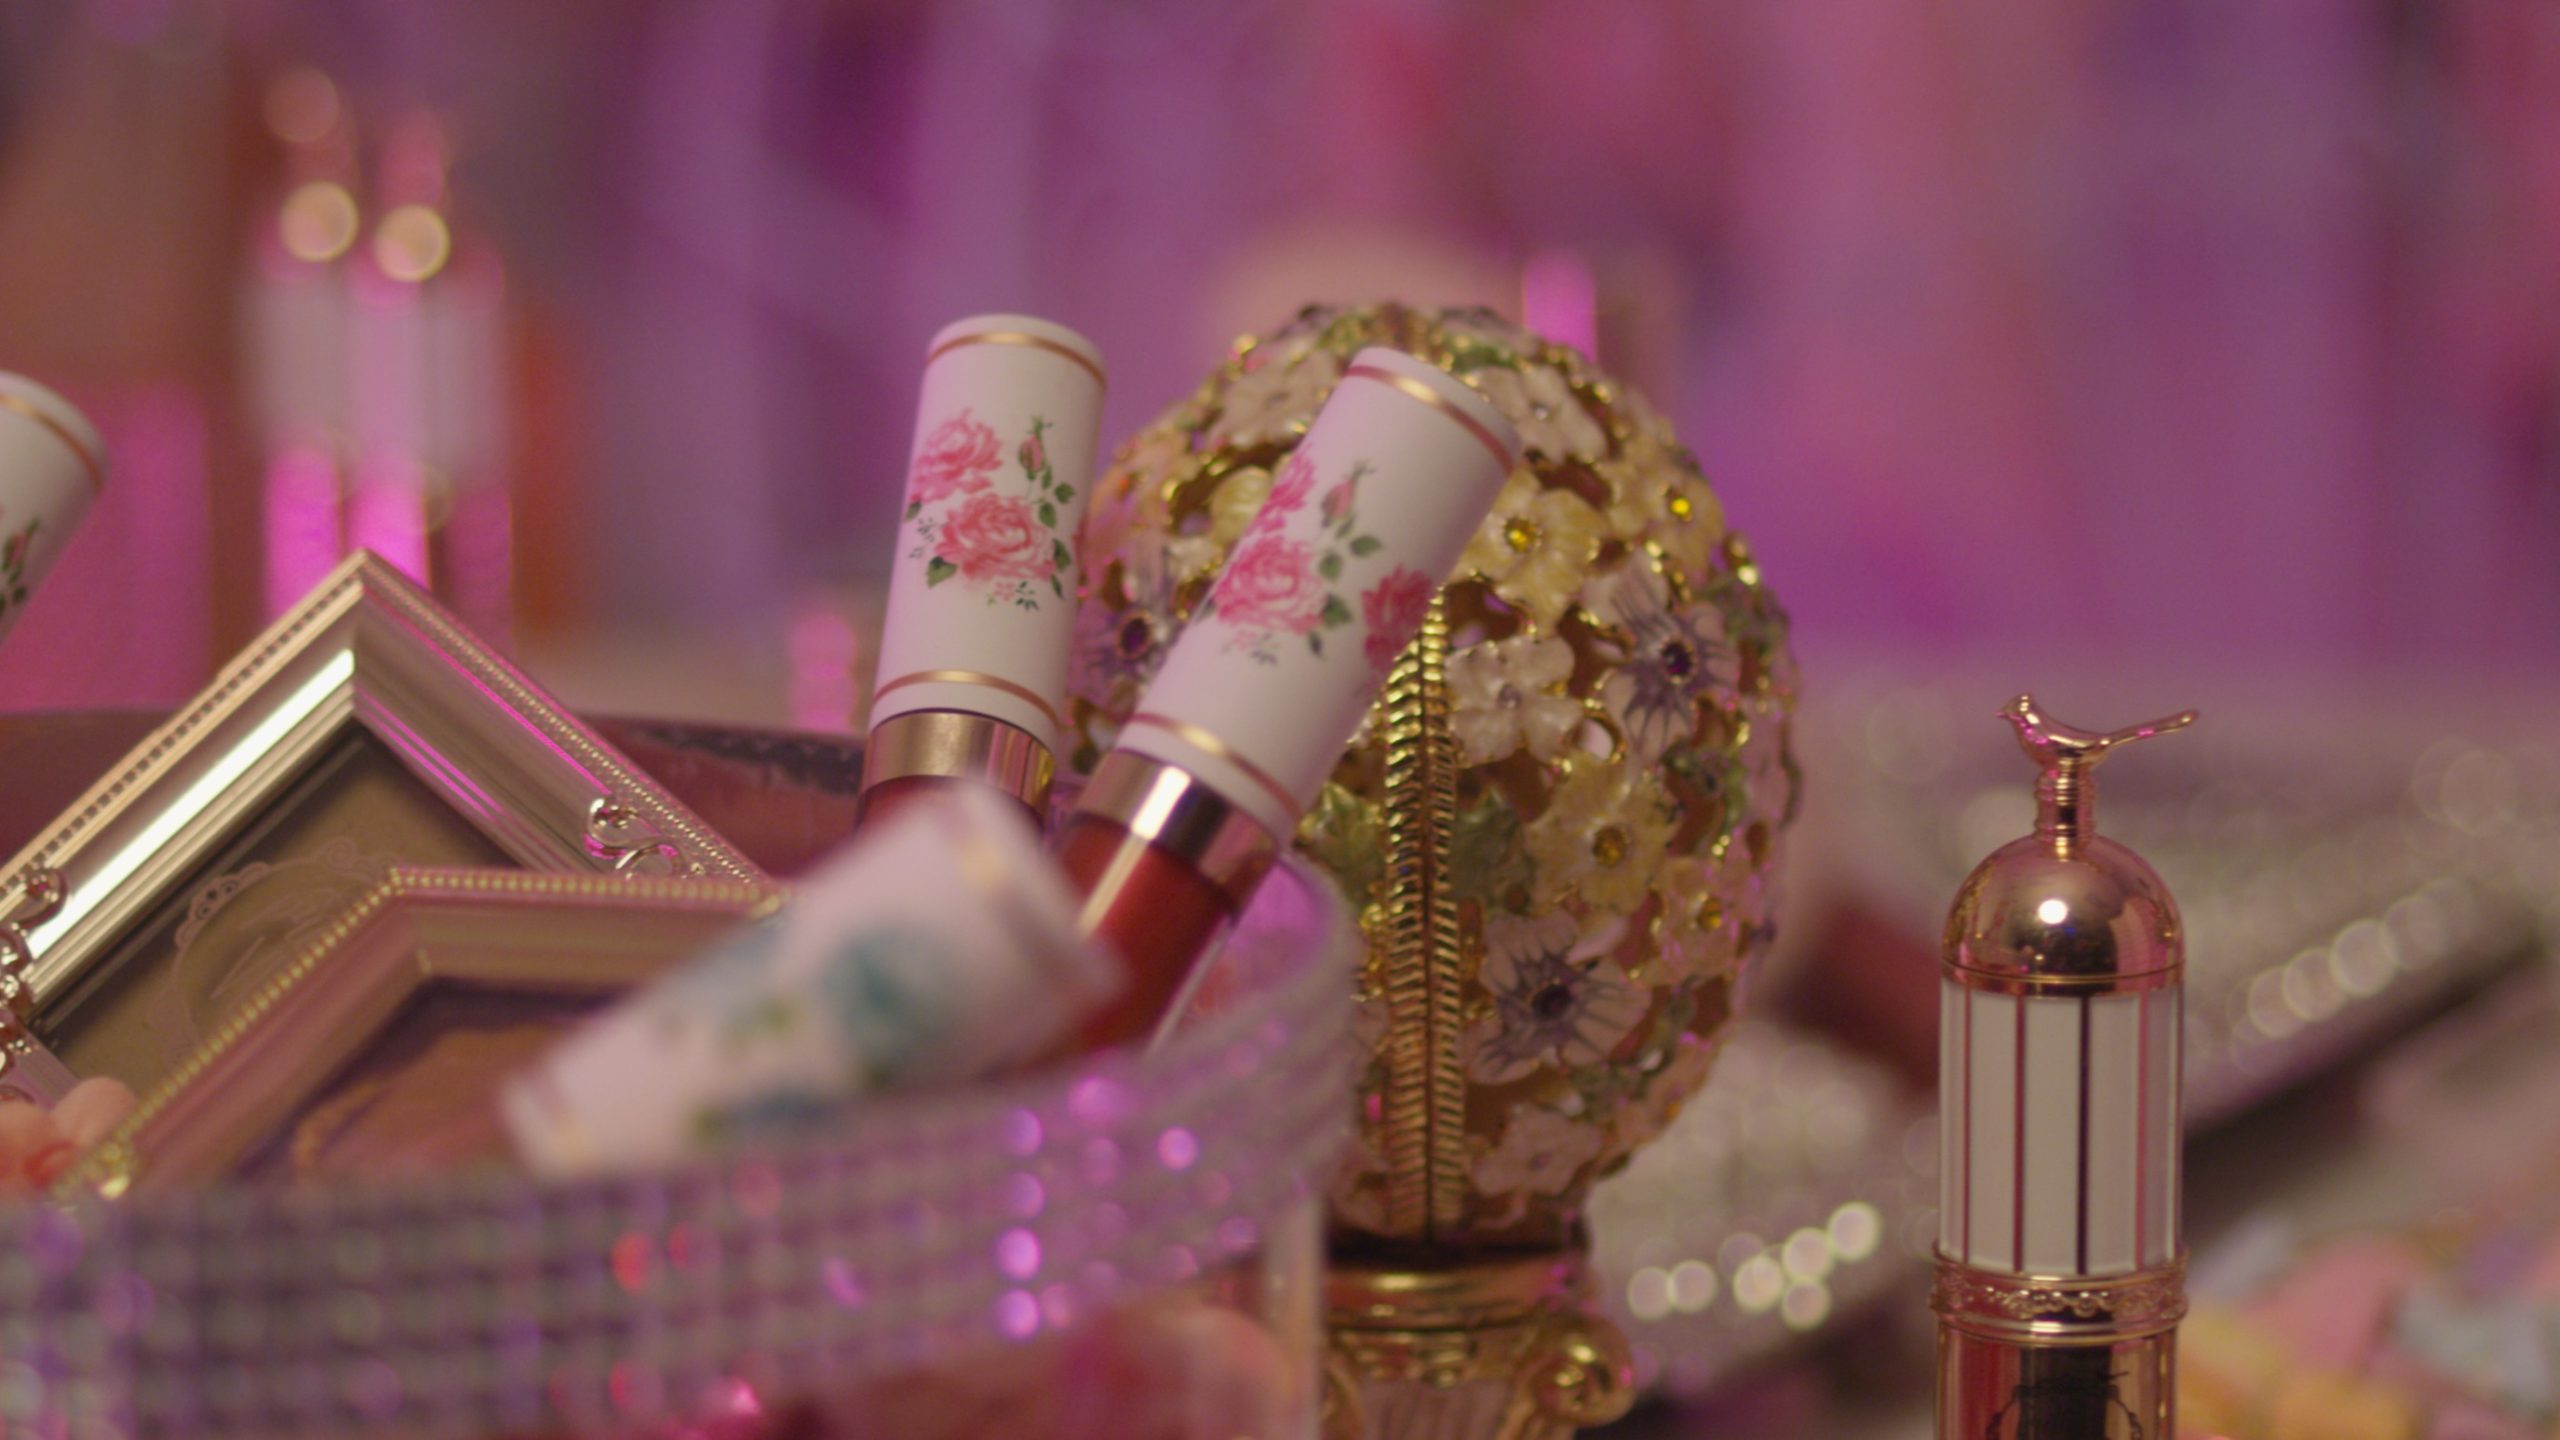 Video Production with Pretty Vulgar-Closeup of various makeup products. One is shaped like an egg with flower patterns.